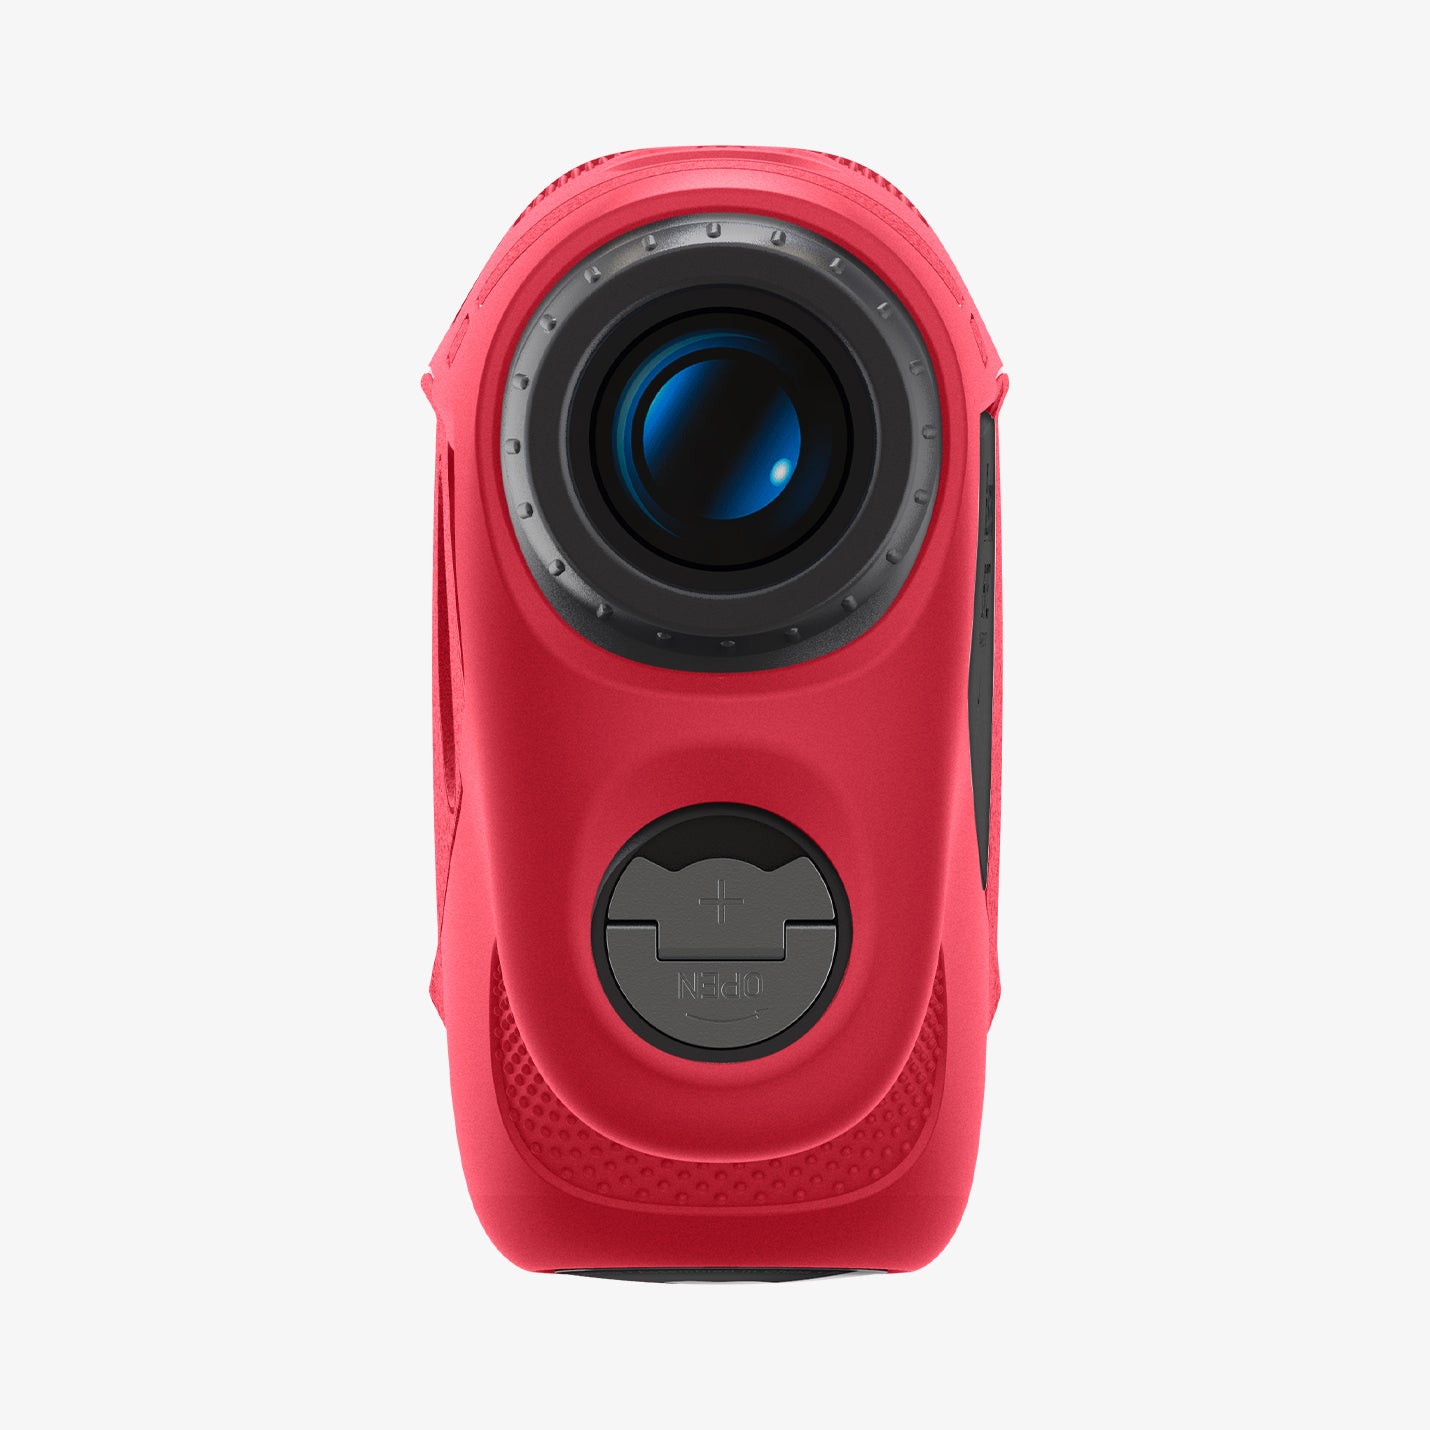 ACS07050 - Bushnell Tour V6 Shift Rangefinder Case Silicone Fit AirTag in red showing the back